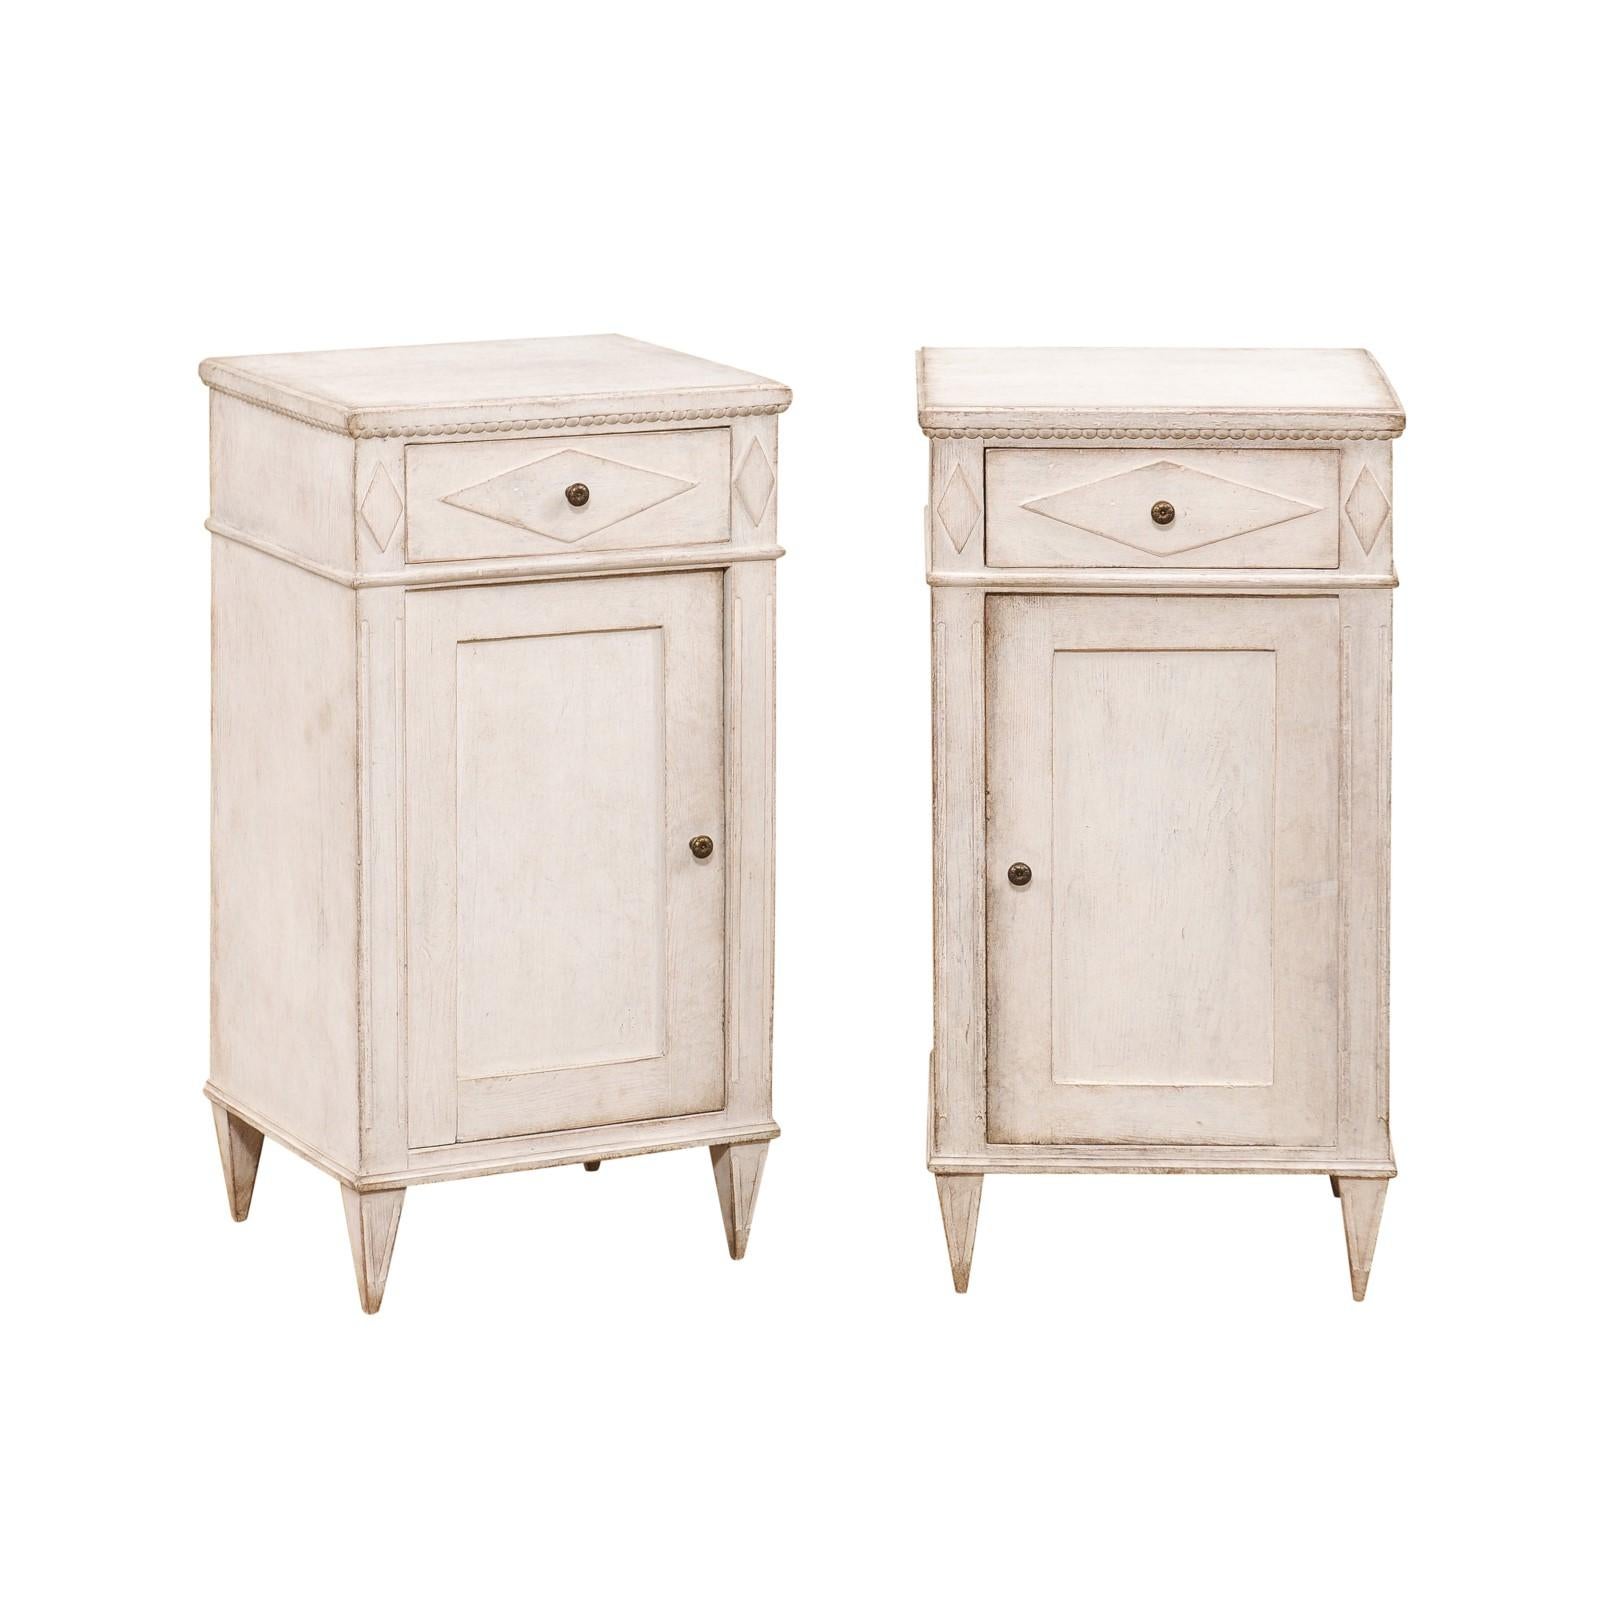 A pair of Swedish Gustavian style painted wood bedside cabinets from the 19th century, with carved diamond motifs, beaded frieze, single drawer over single door. Created in Sweden during the 19th century, each of this pair of Gustavian style bedside